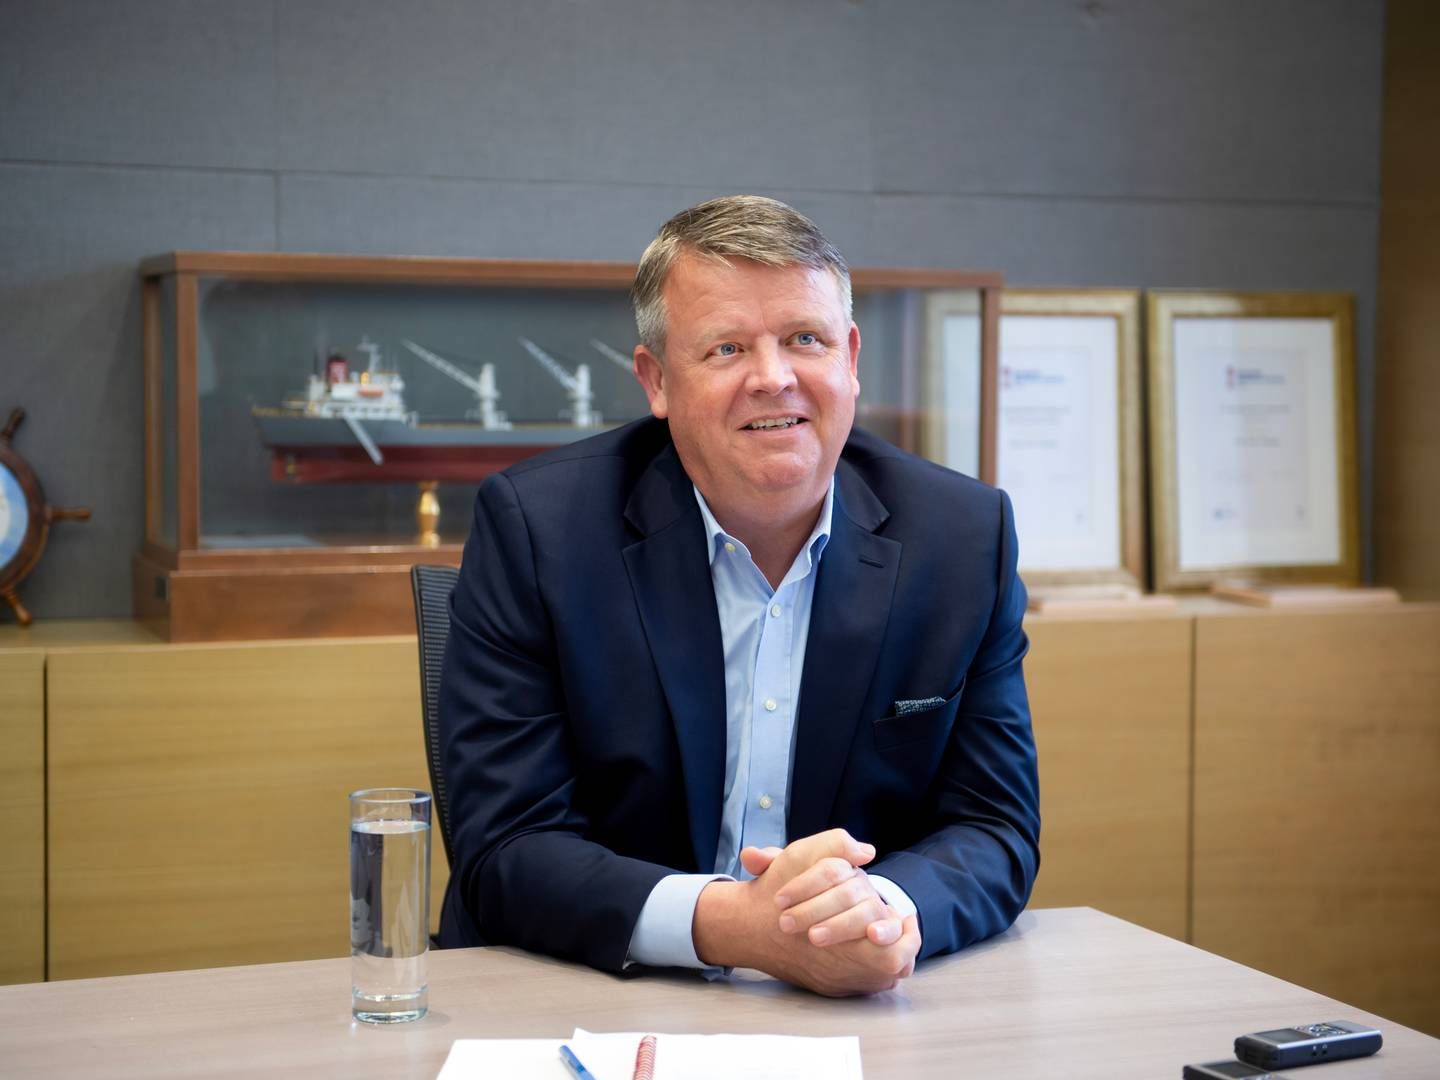 "I usually say to our investors that this can be a huge opportunity and a game changer if we get it right," Martin Fruergaard, CEO, Pacific Basin, says about investing in green tonnage. | Foto: Ali Ghorbani